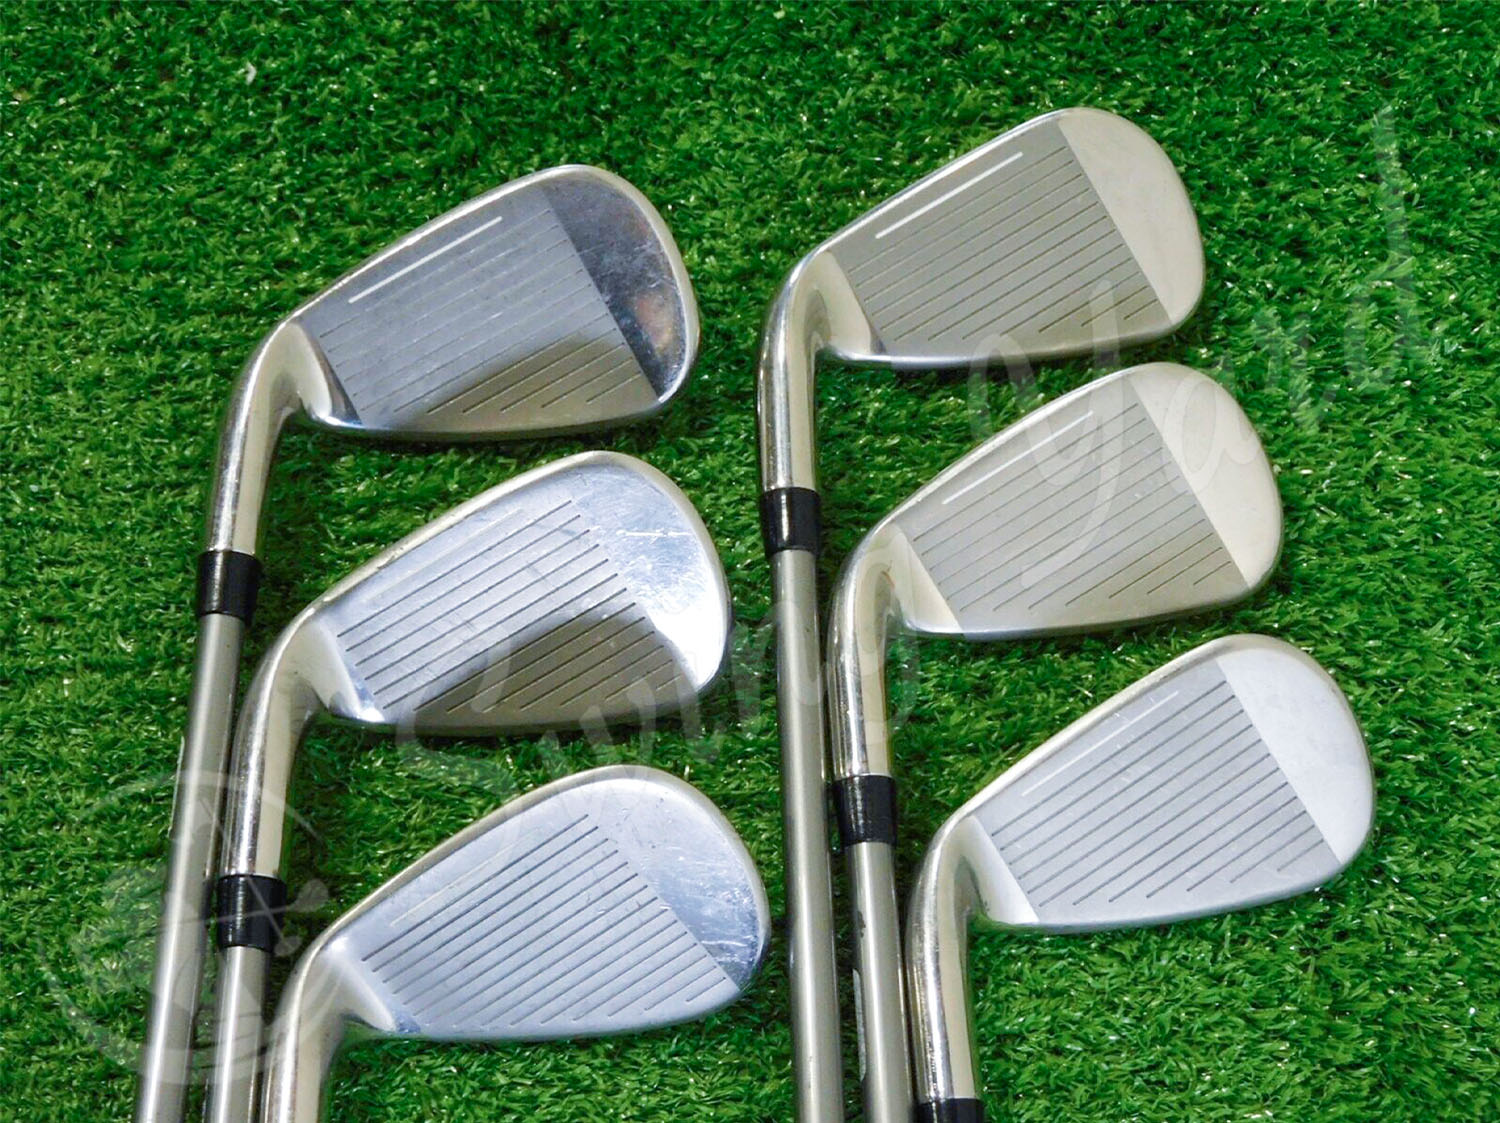 The Cobra Women’s Fly XL Petite Irons set in the grass